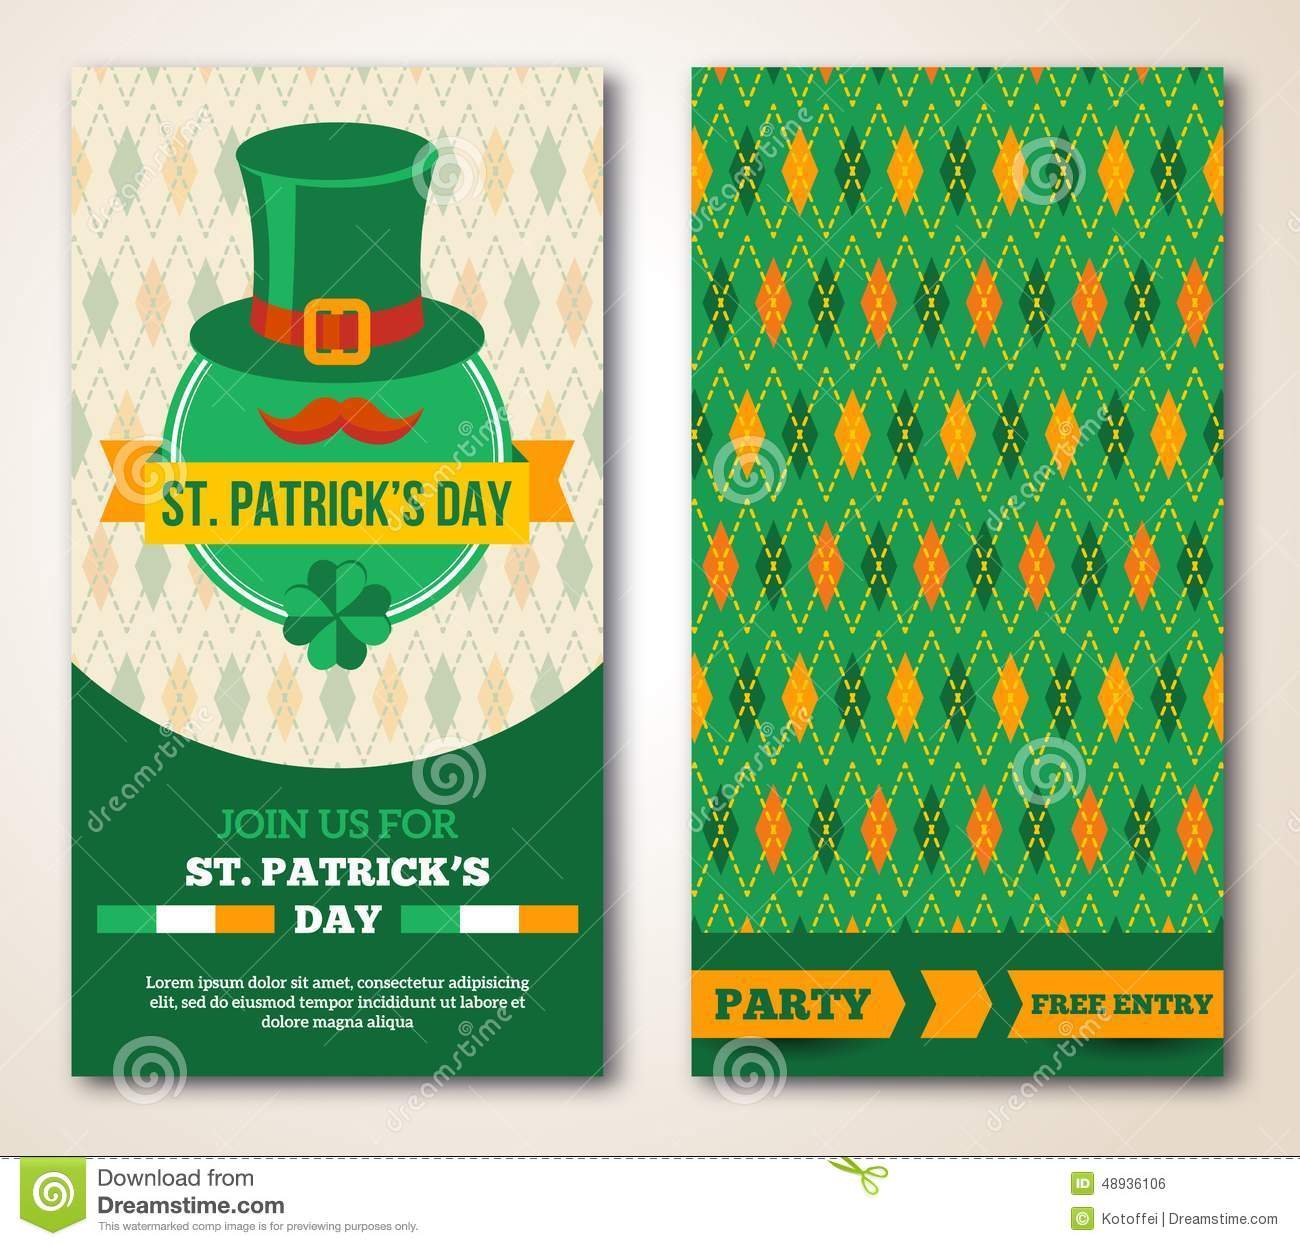 St Patrick's Day Party Invitations